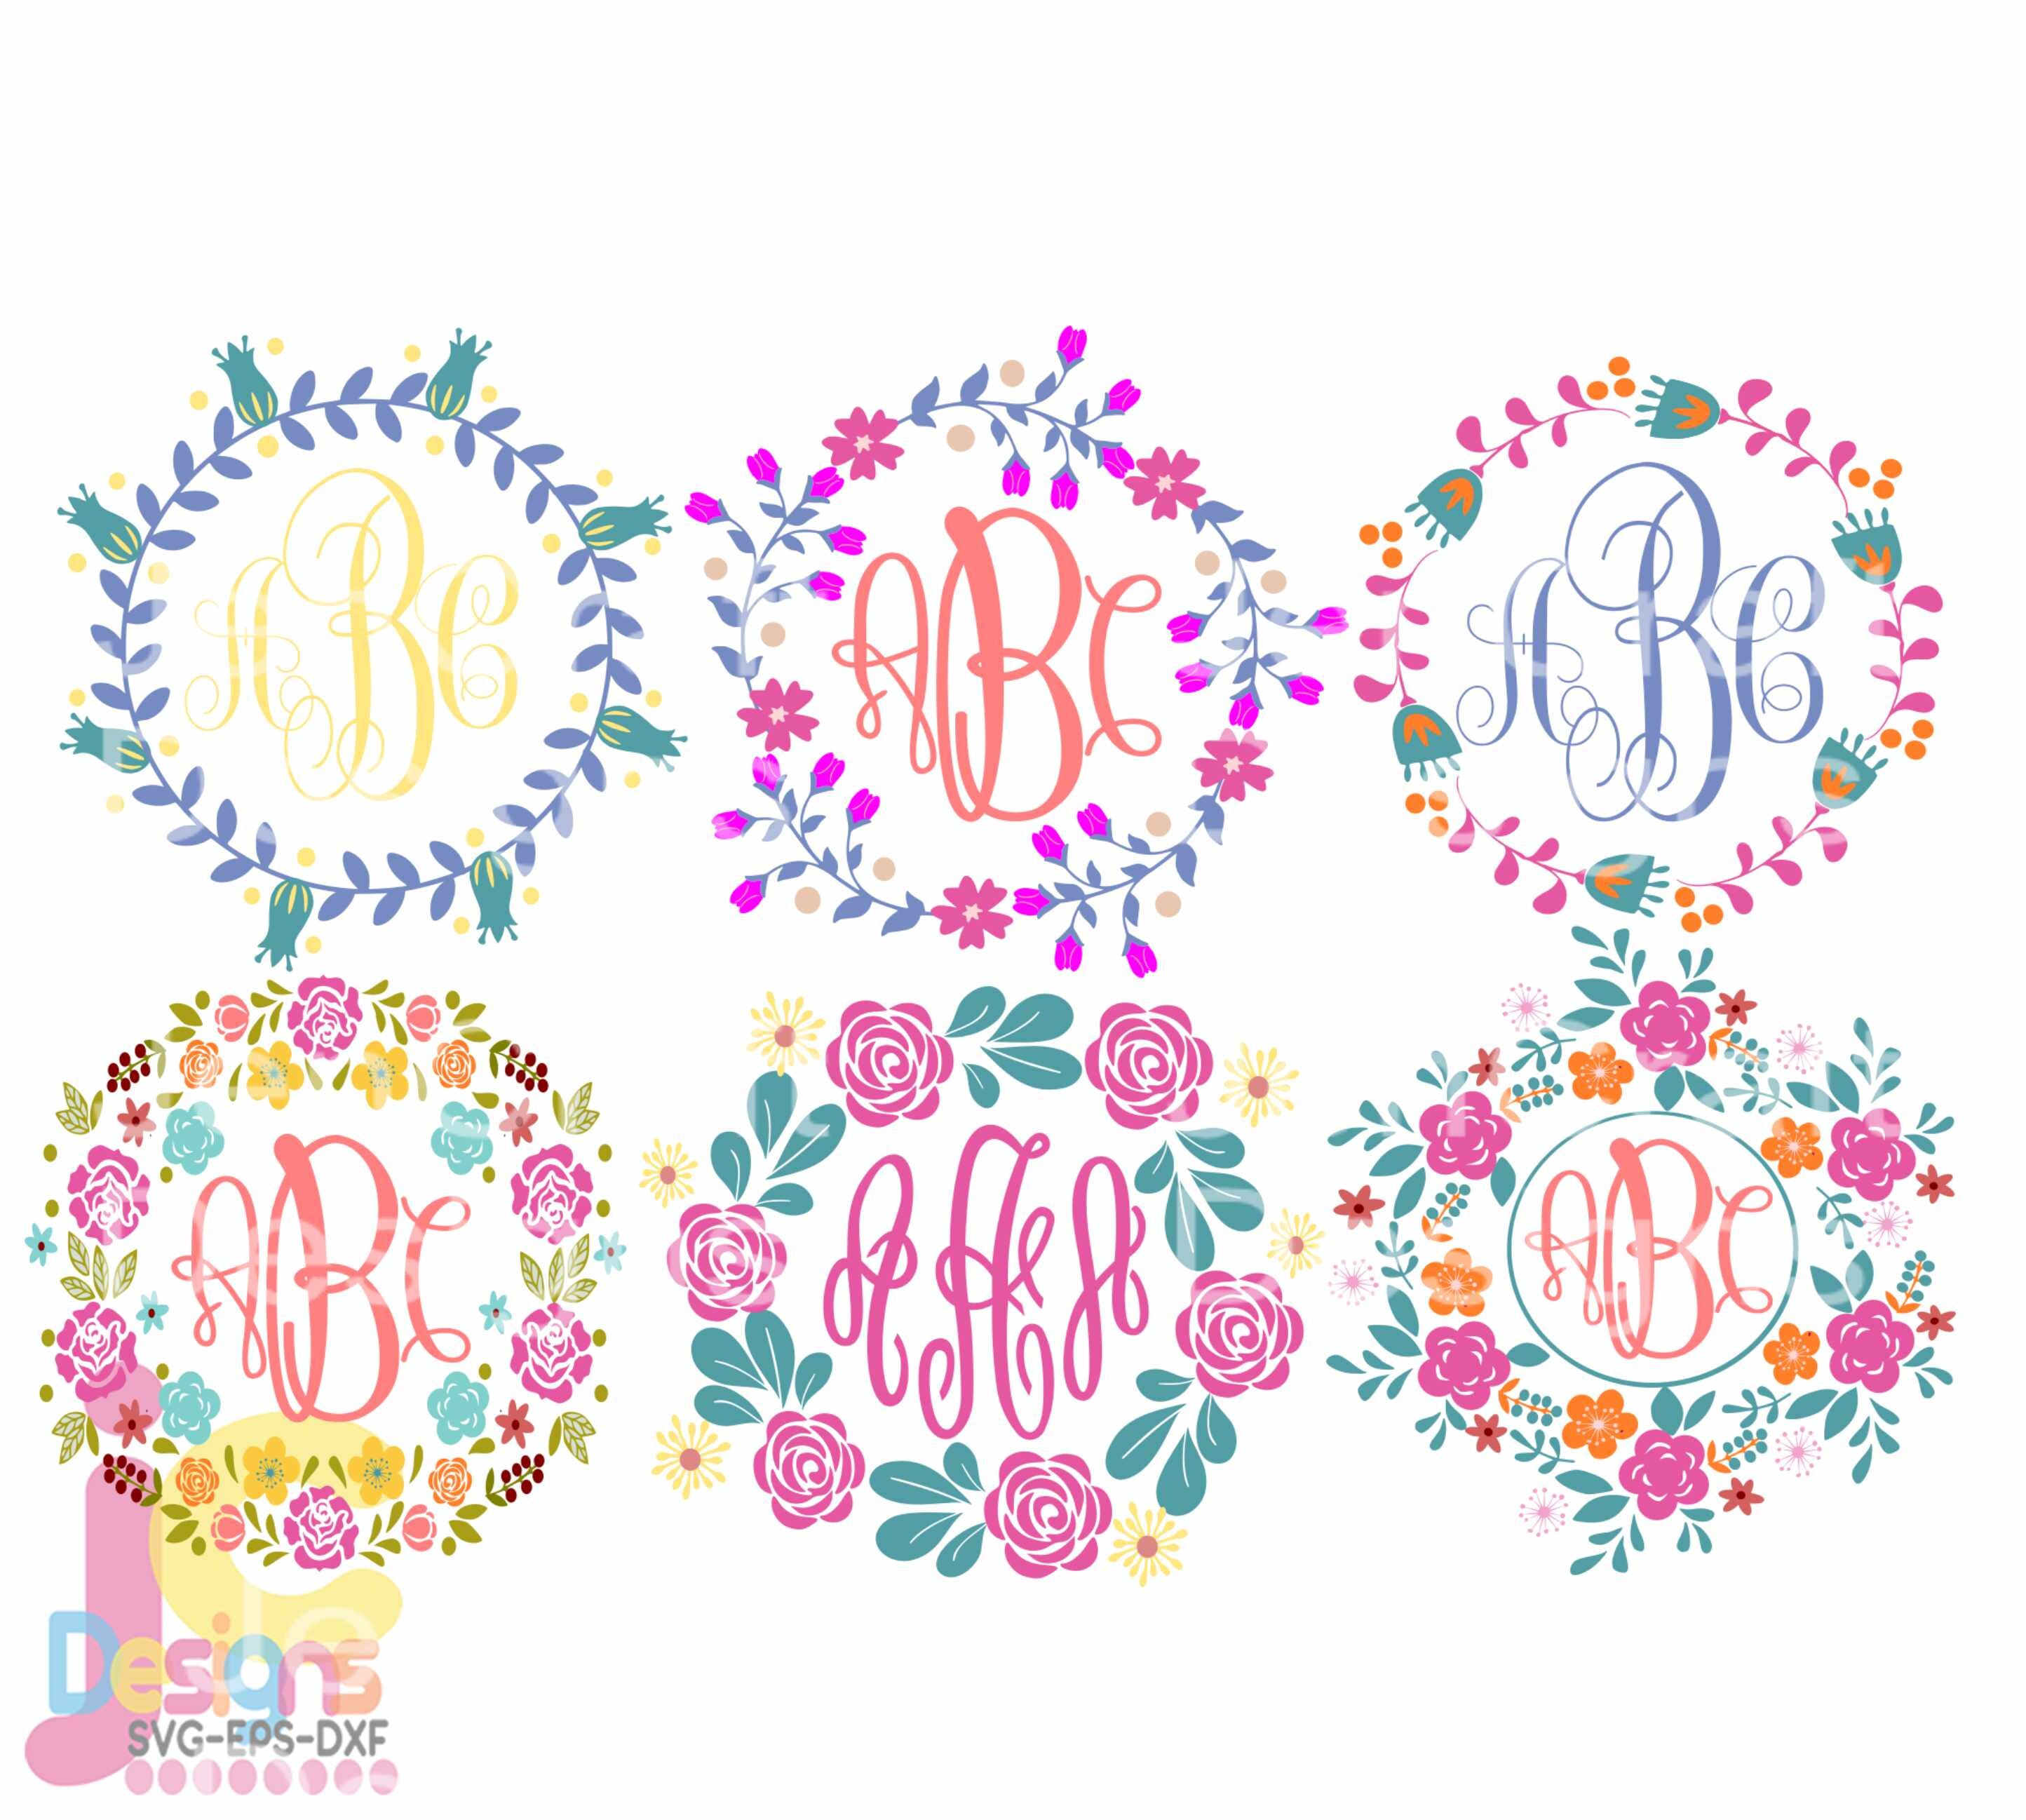 Download Floral Wreath Svg Monogram Frames Flowers Mothers Day Birthday Etsy